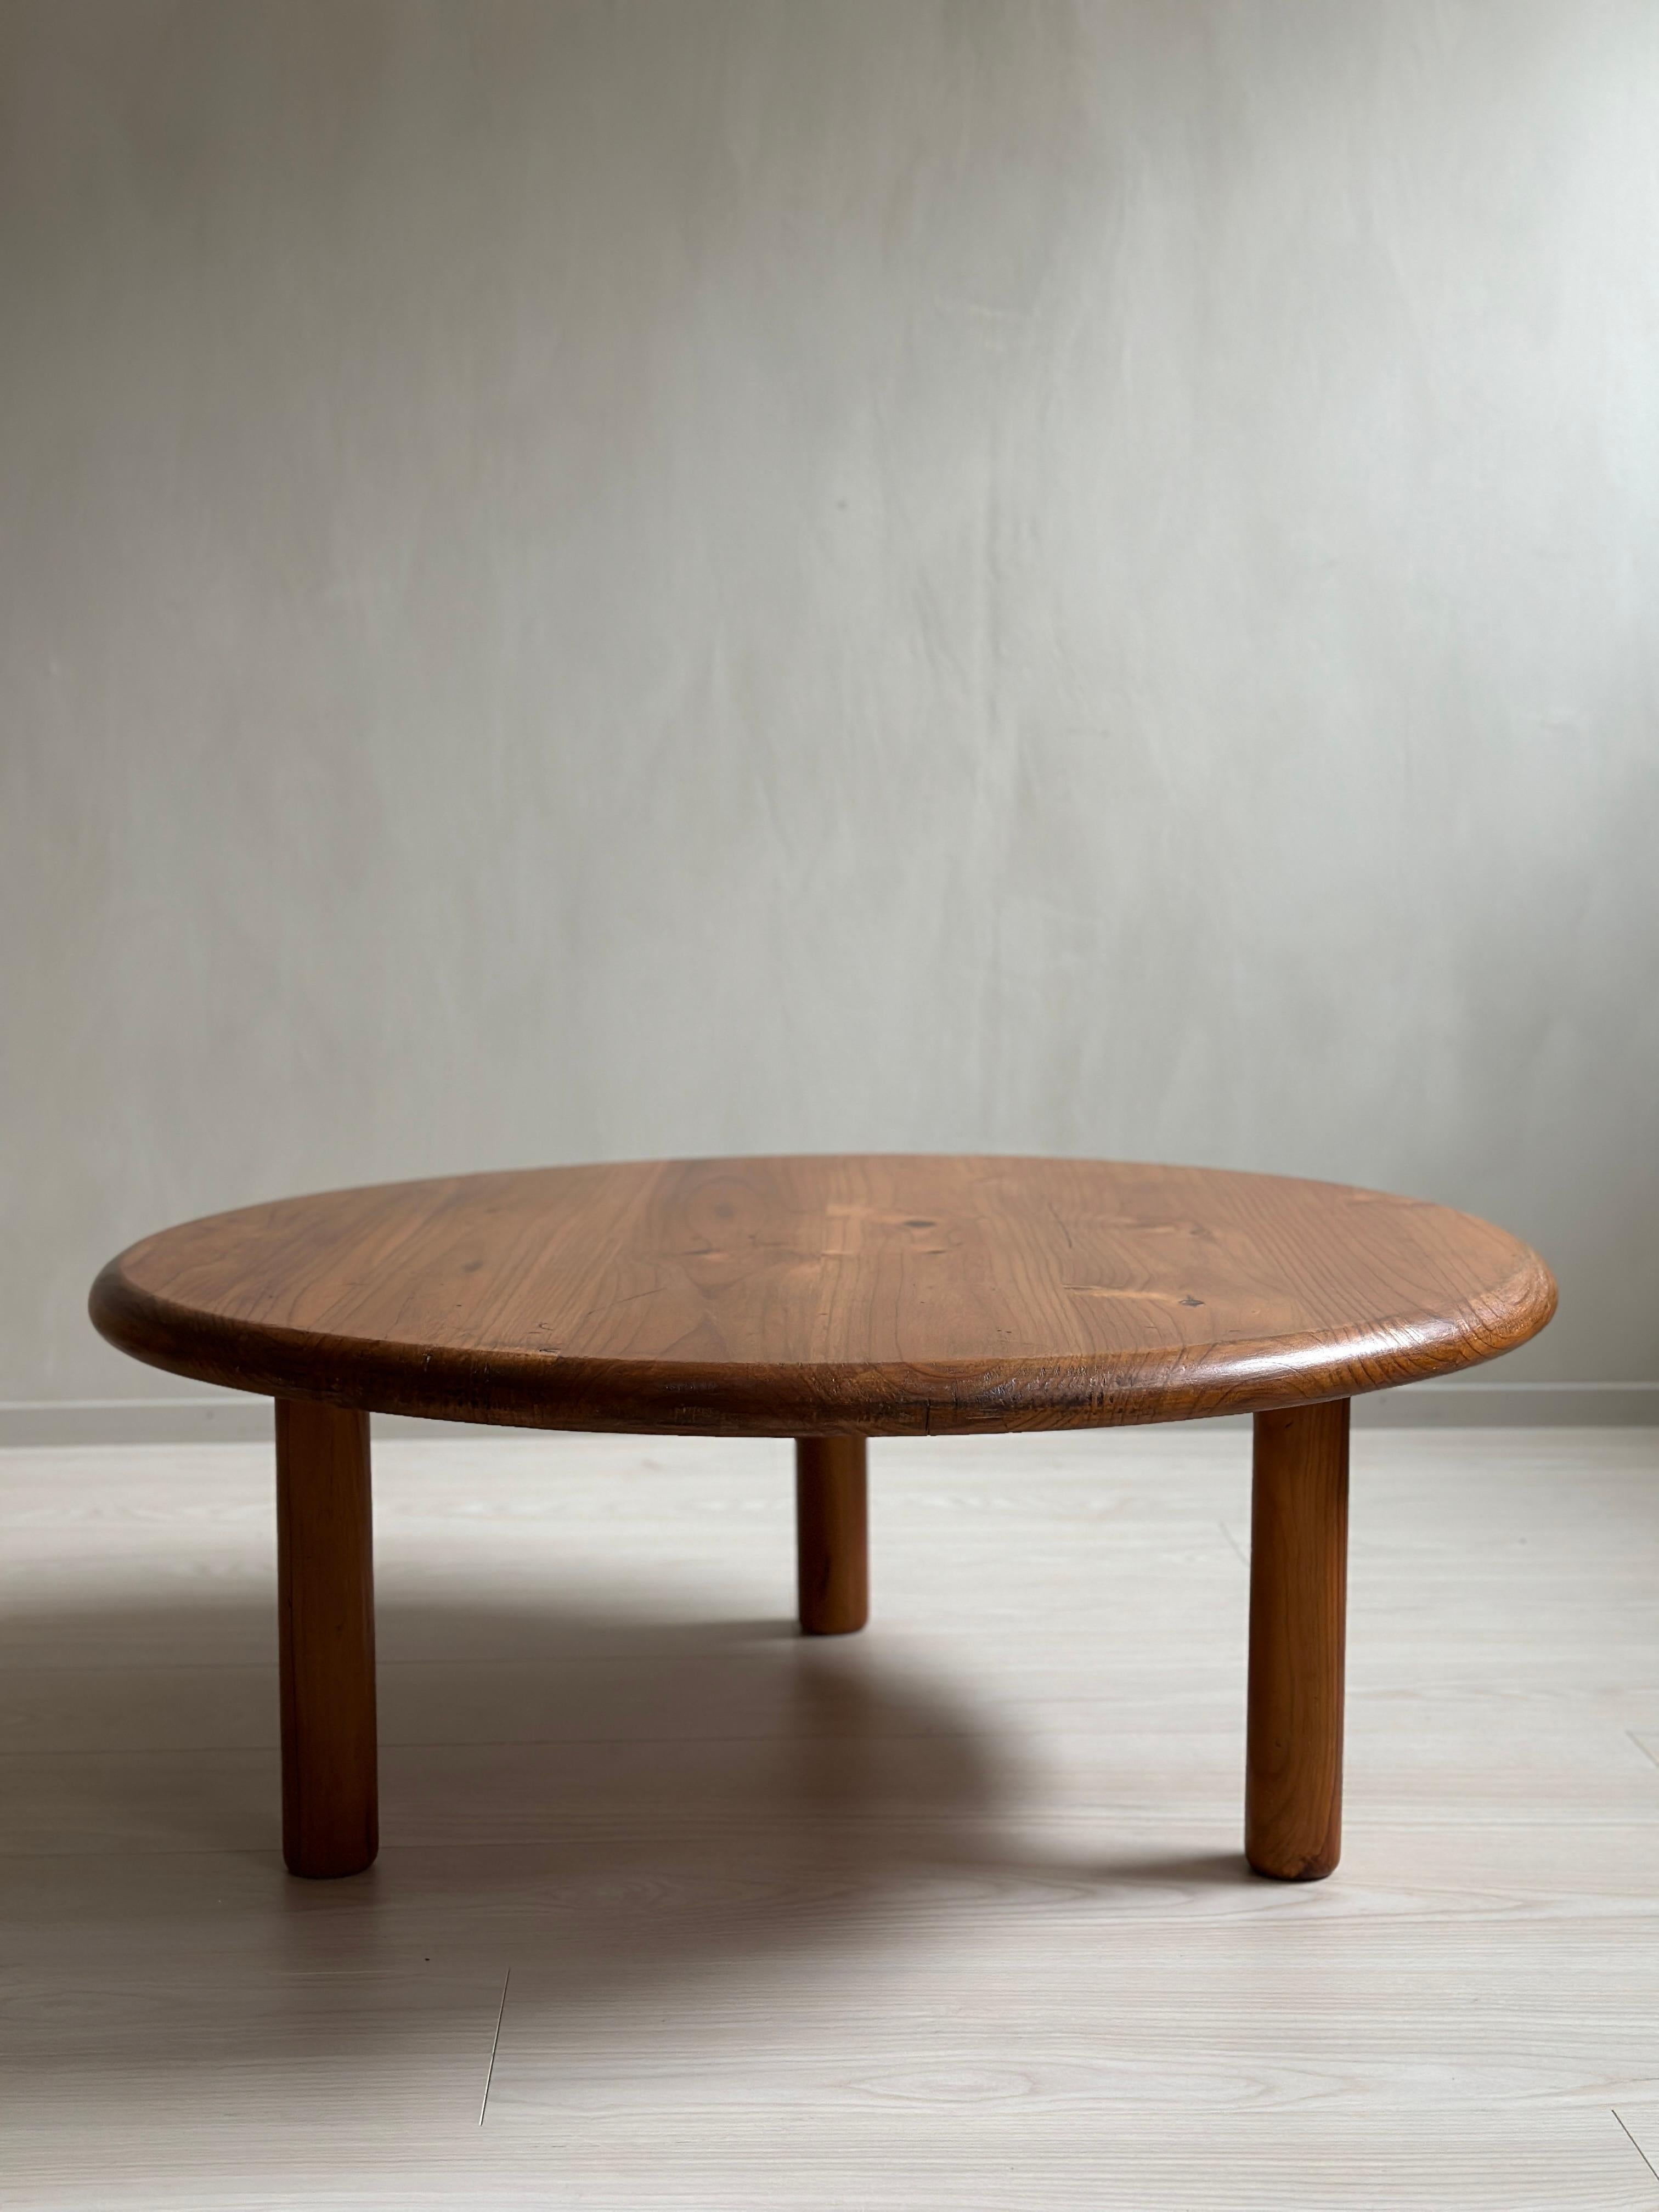 This French midcentury coffee table from around 1960s, inspired by Charlotte Perriand, features a beautiful patina and is crafted from solid pine. Its three rounded legs add a unique touch of elegance to the design.